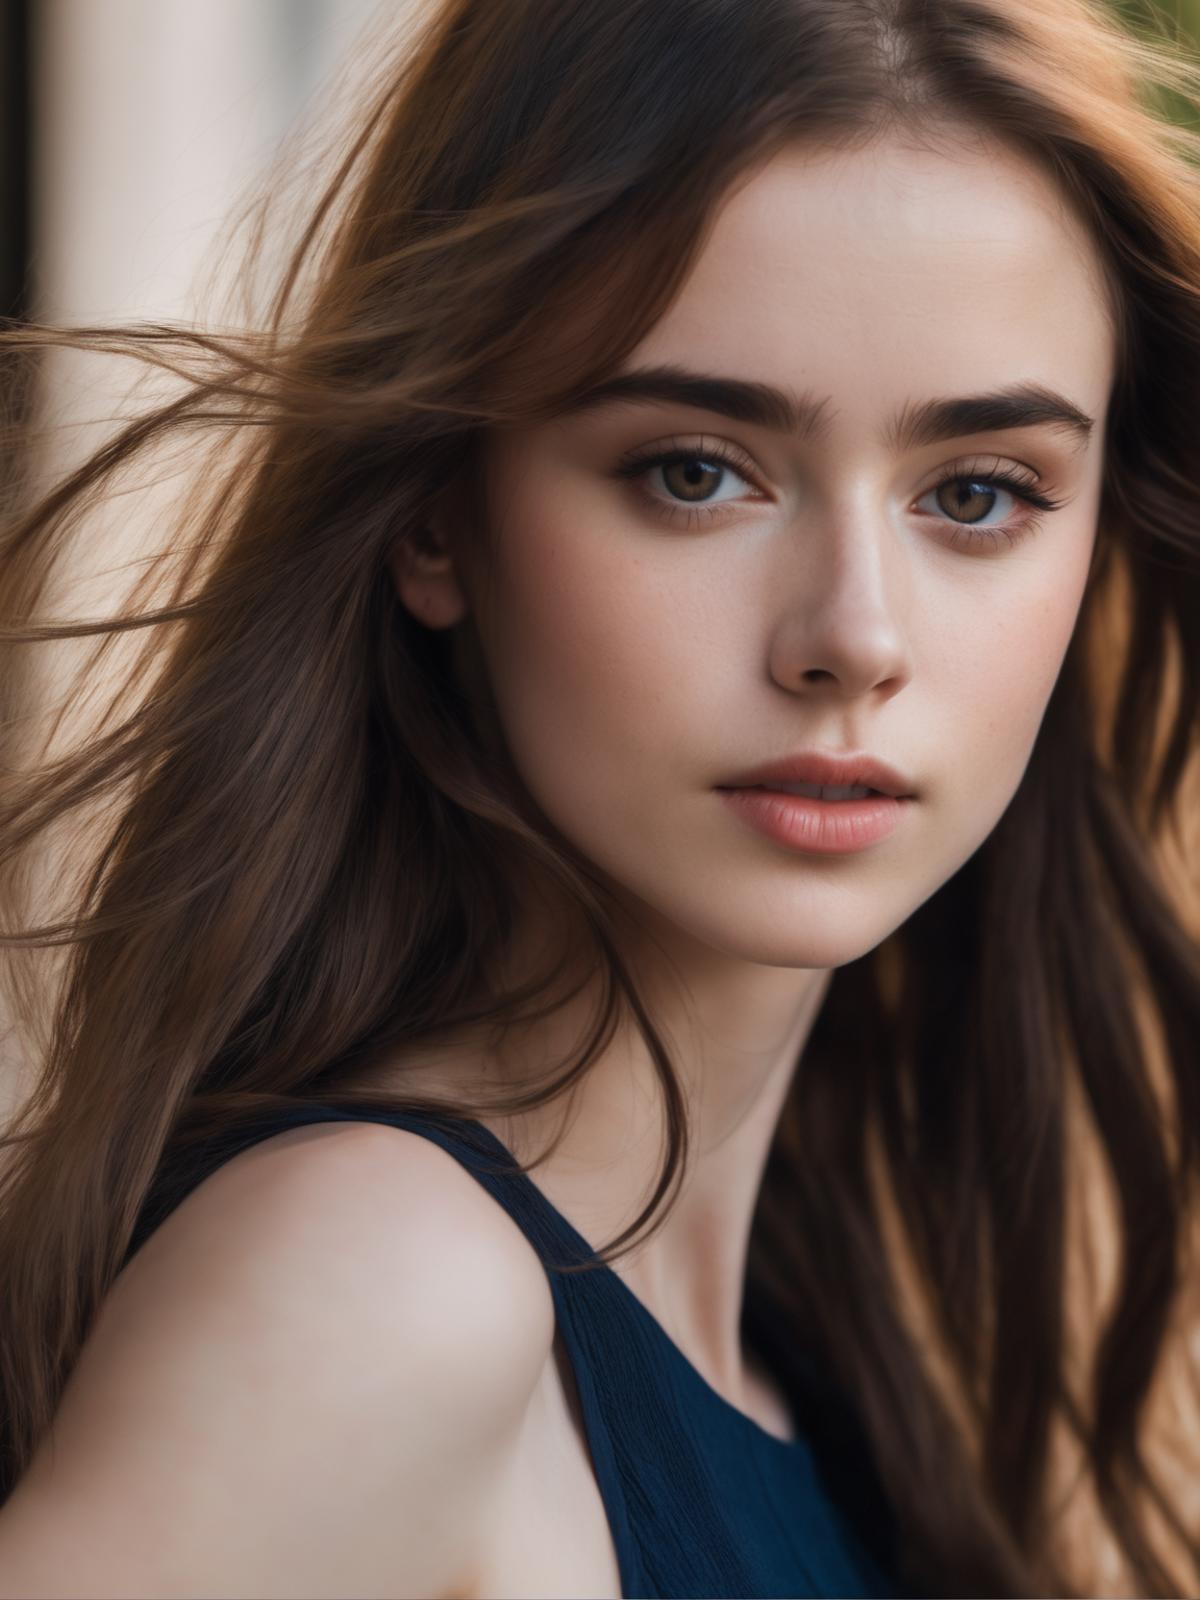 Lily Jane Collins image by gattaplayer